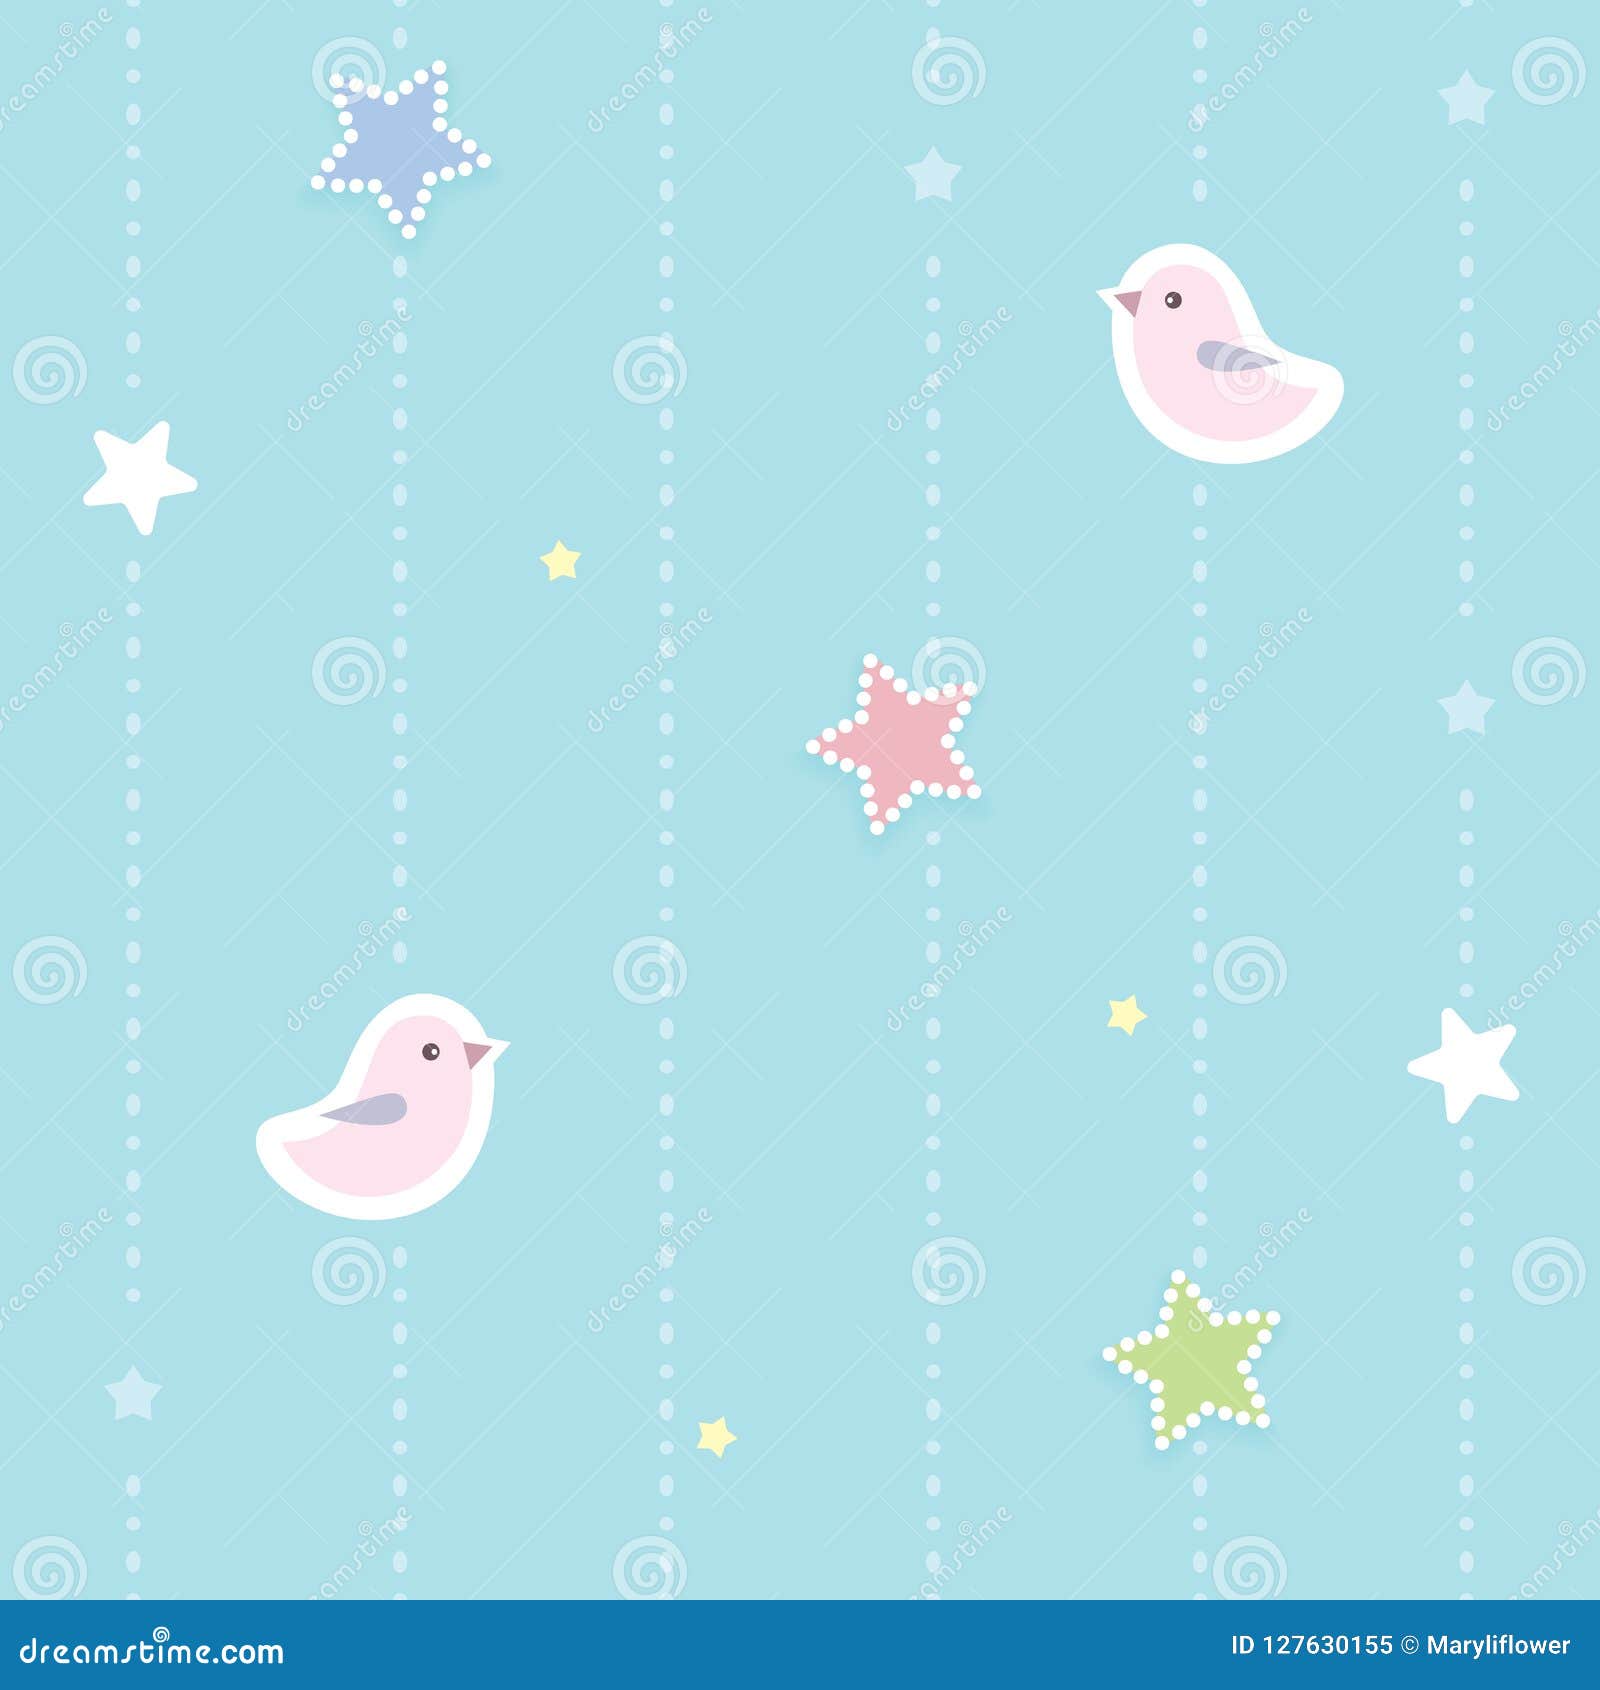 Cute Seamless Background with Colorful Dotted Stars and Pink Birds.  Children`s Bedroom, Baby Nursery Wallpaper. Stock Vector - Illustration of  backdrop, colorful: 127630155